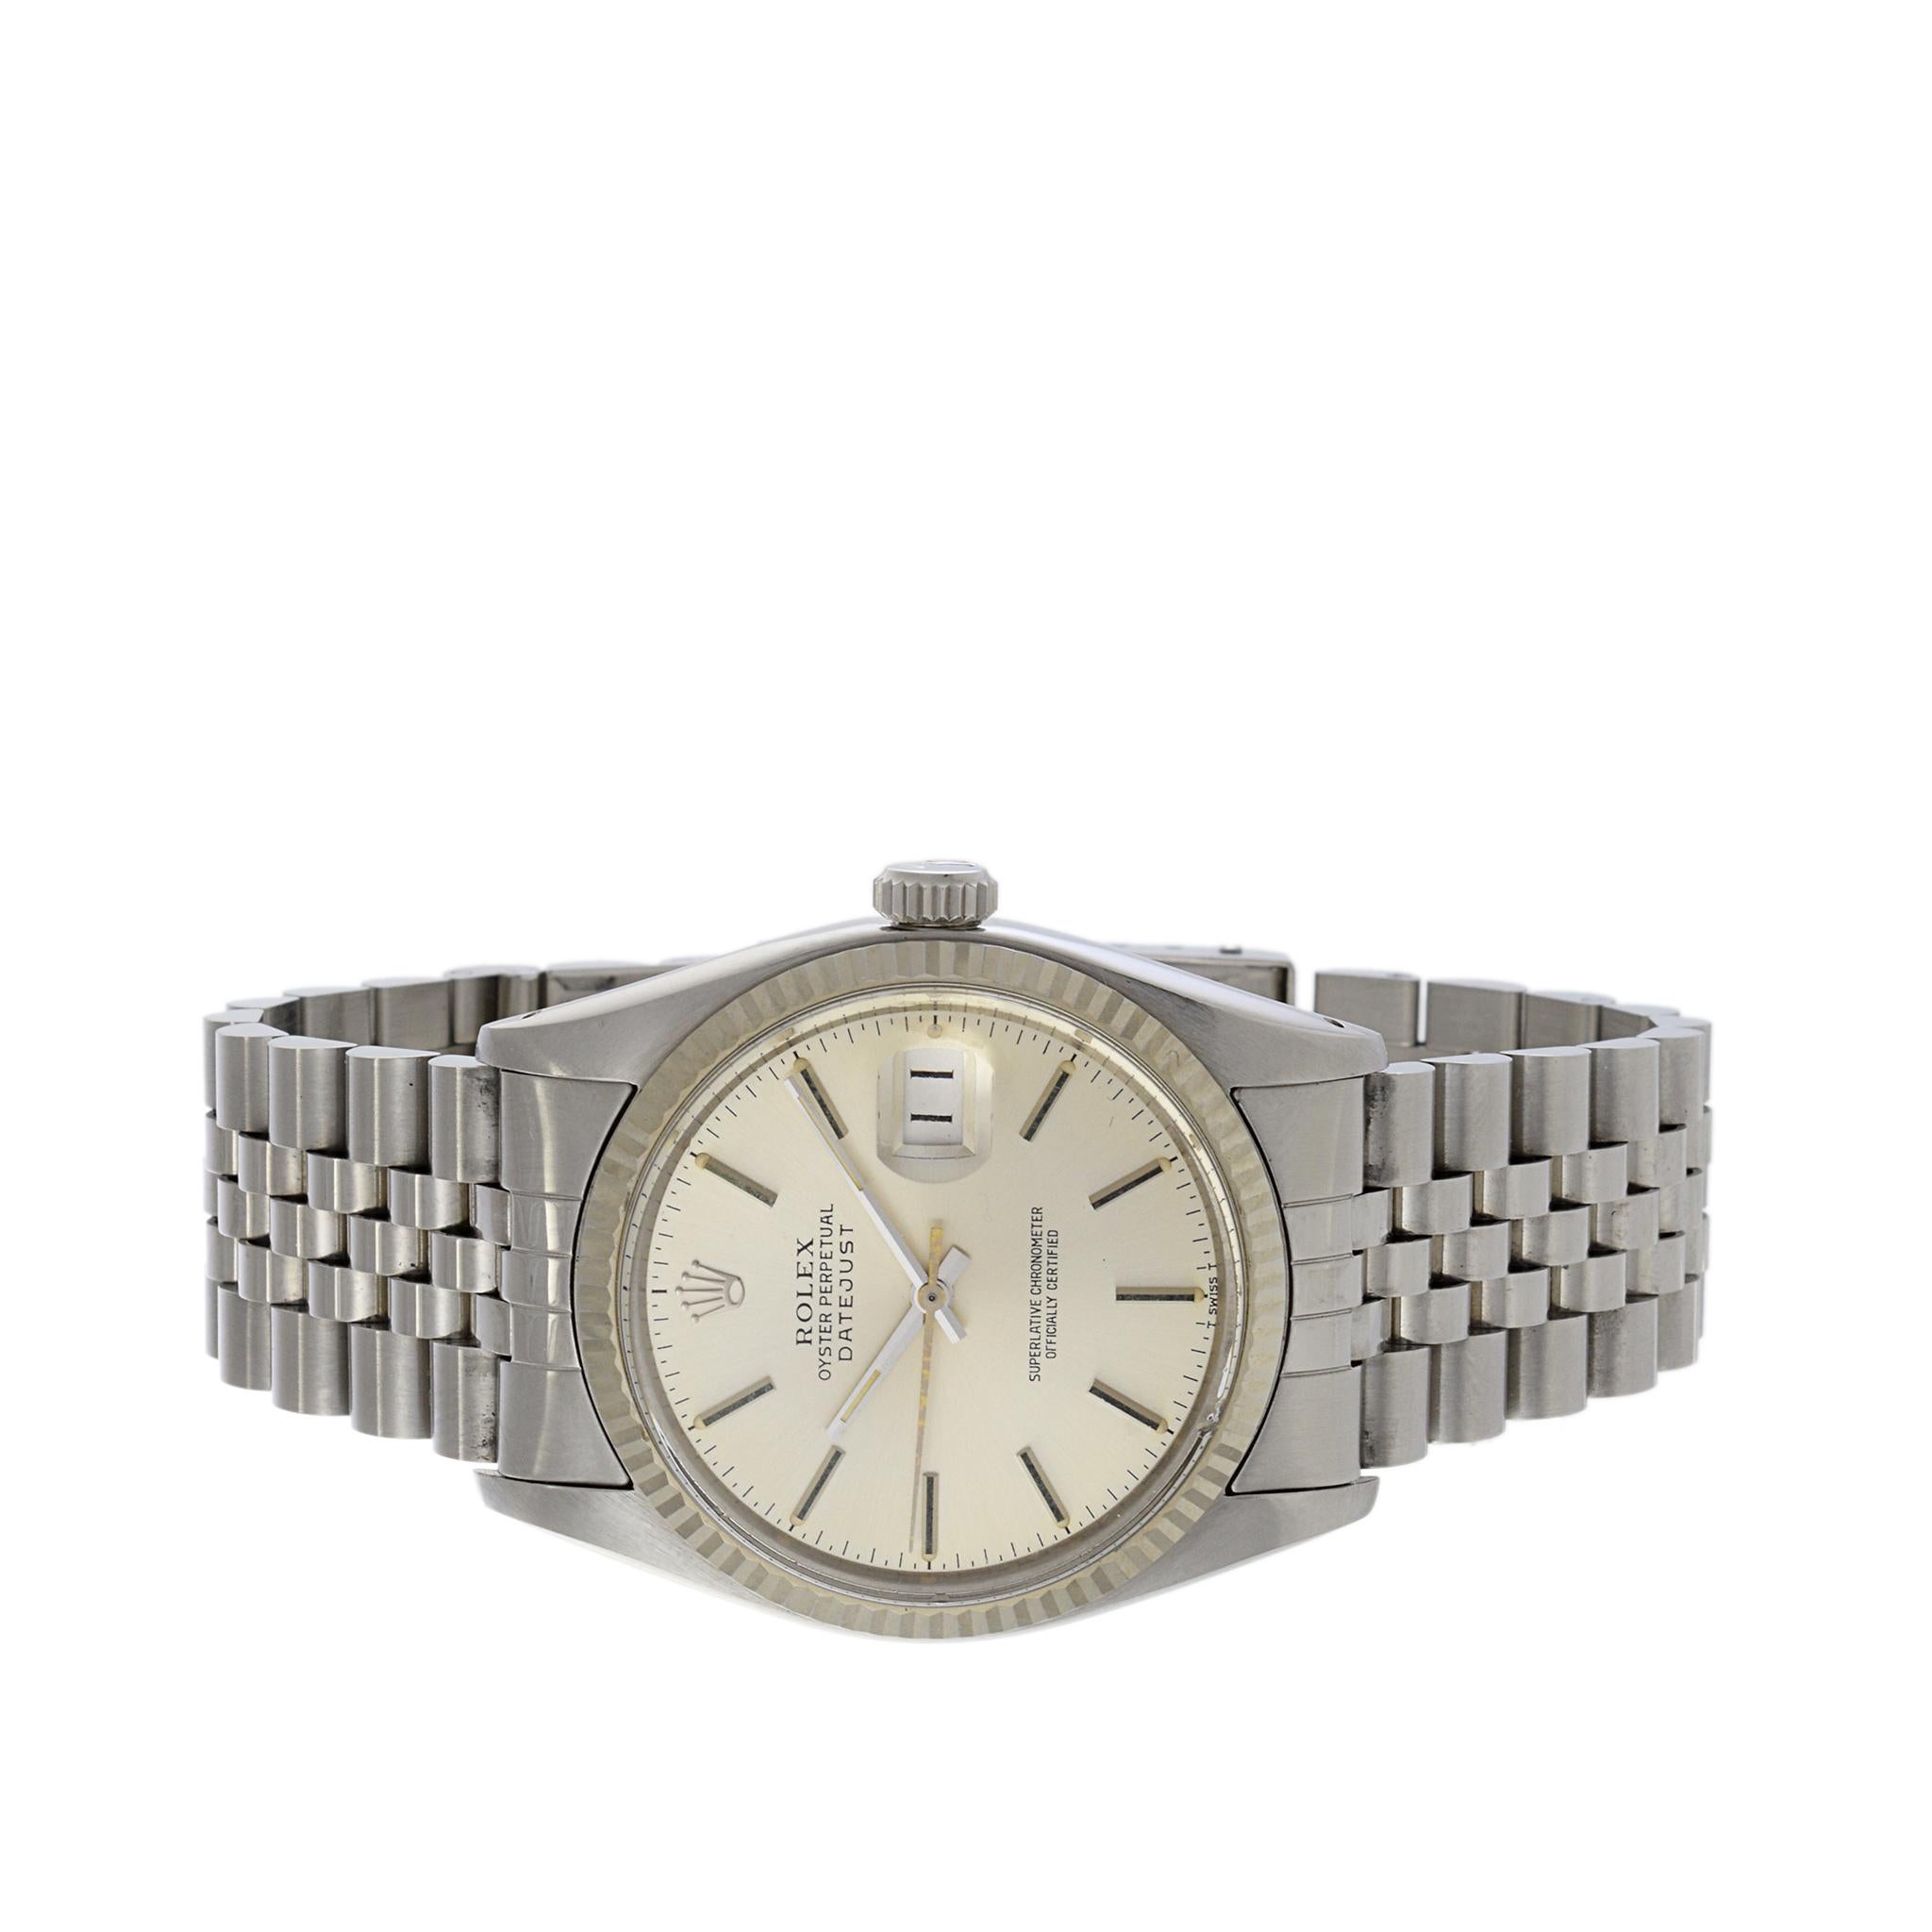 Women's or Men's Rolex Datejust 36 Quickset Reference 16014 For Sale